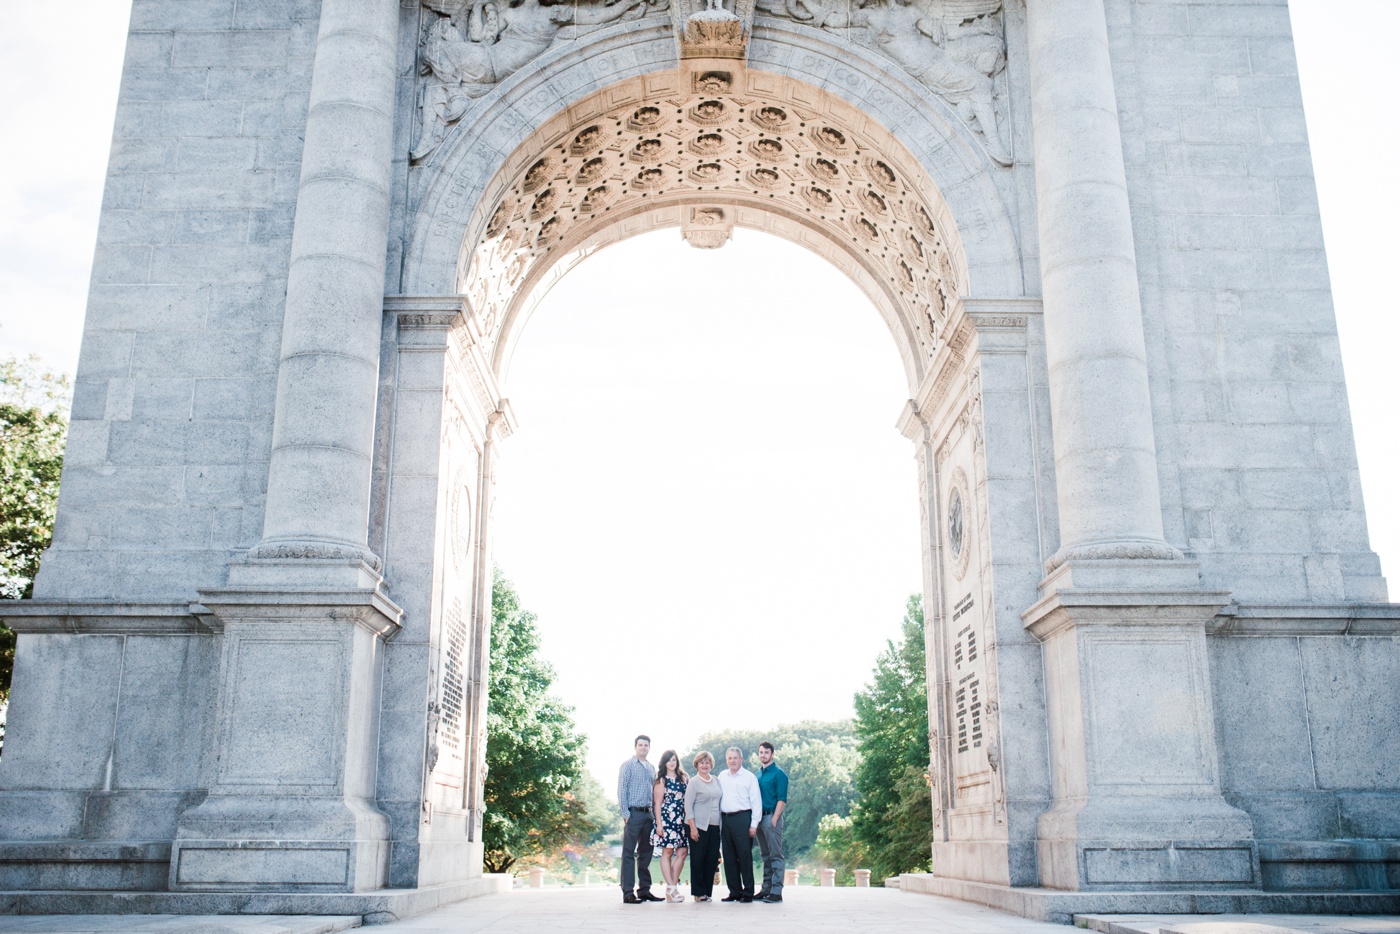 The Allen Family - Valley Forge Family Session - Pennsylvania Family Photographer - Alison Dunn Photography photo